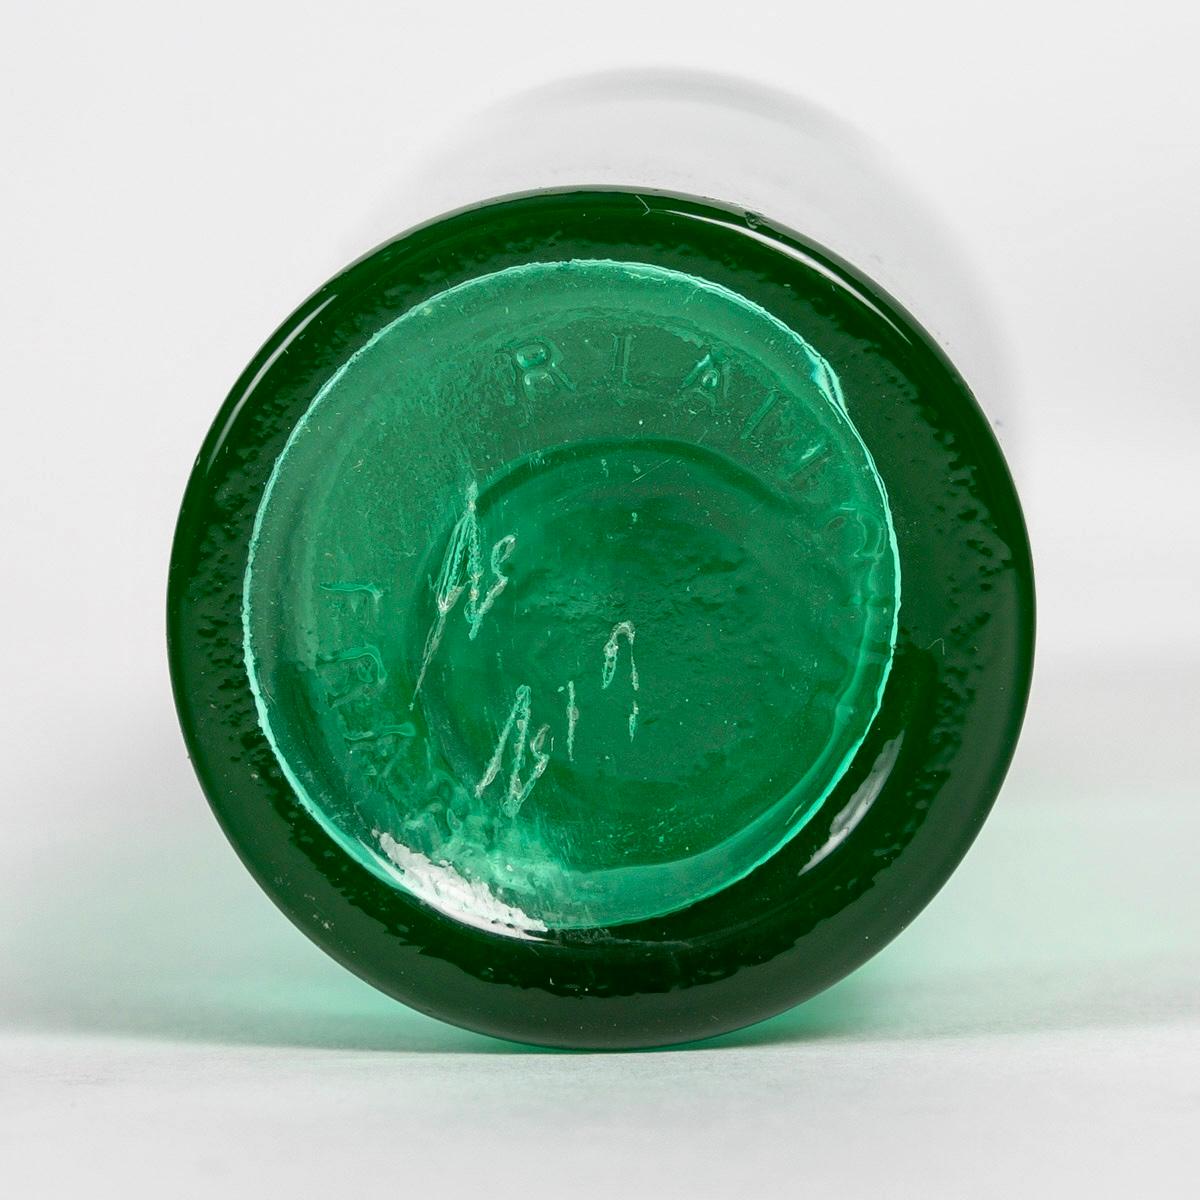 Molded 1929 René Lalique - 3 Perfume Bottles Sans Adieu Emerald Green Glass For Worth For Sale